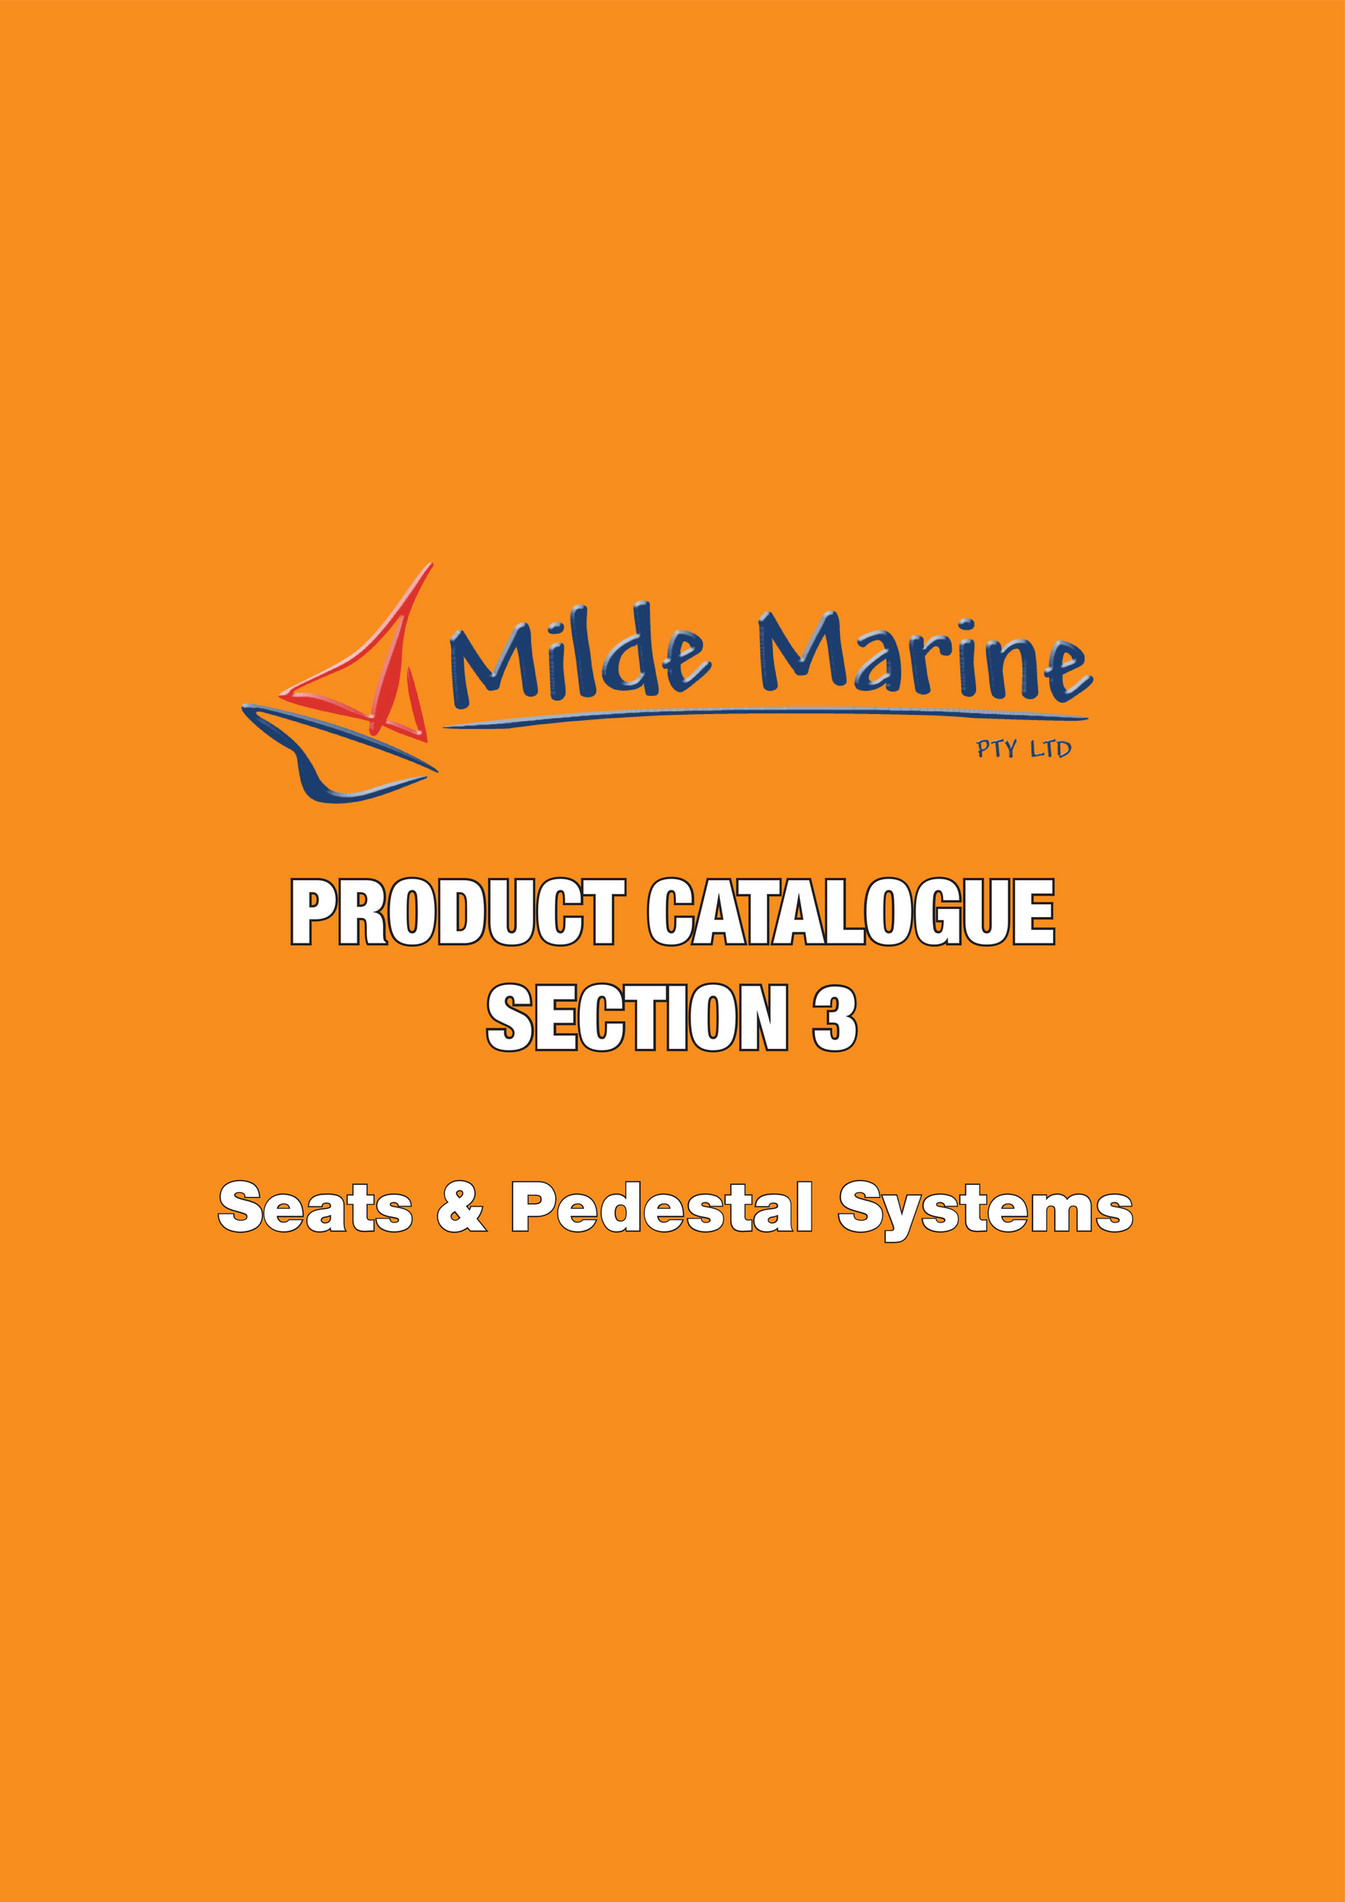 My publications - Milde Marine Product Catalogue 2023/24 - Section 3 ...